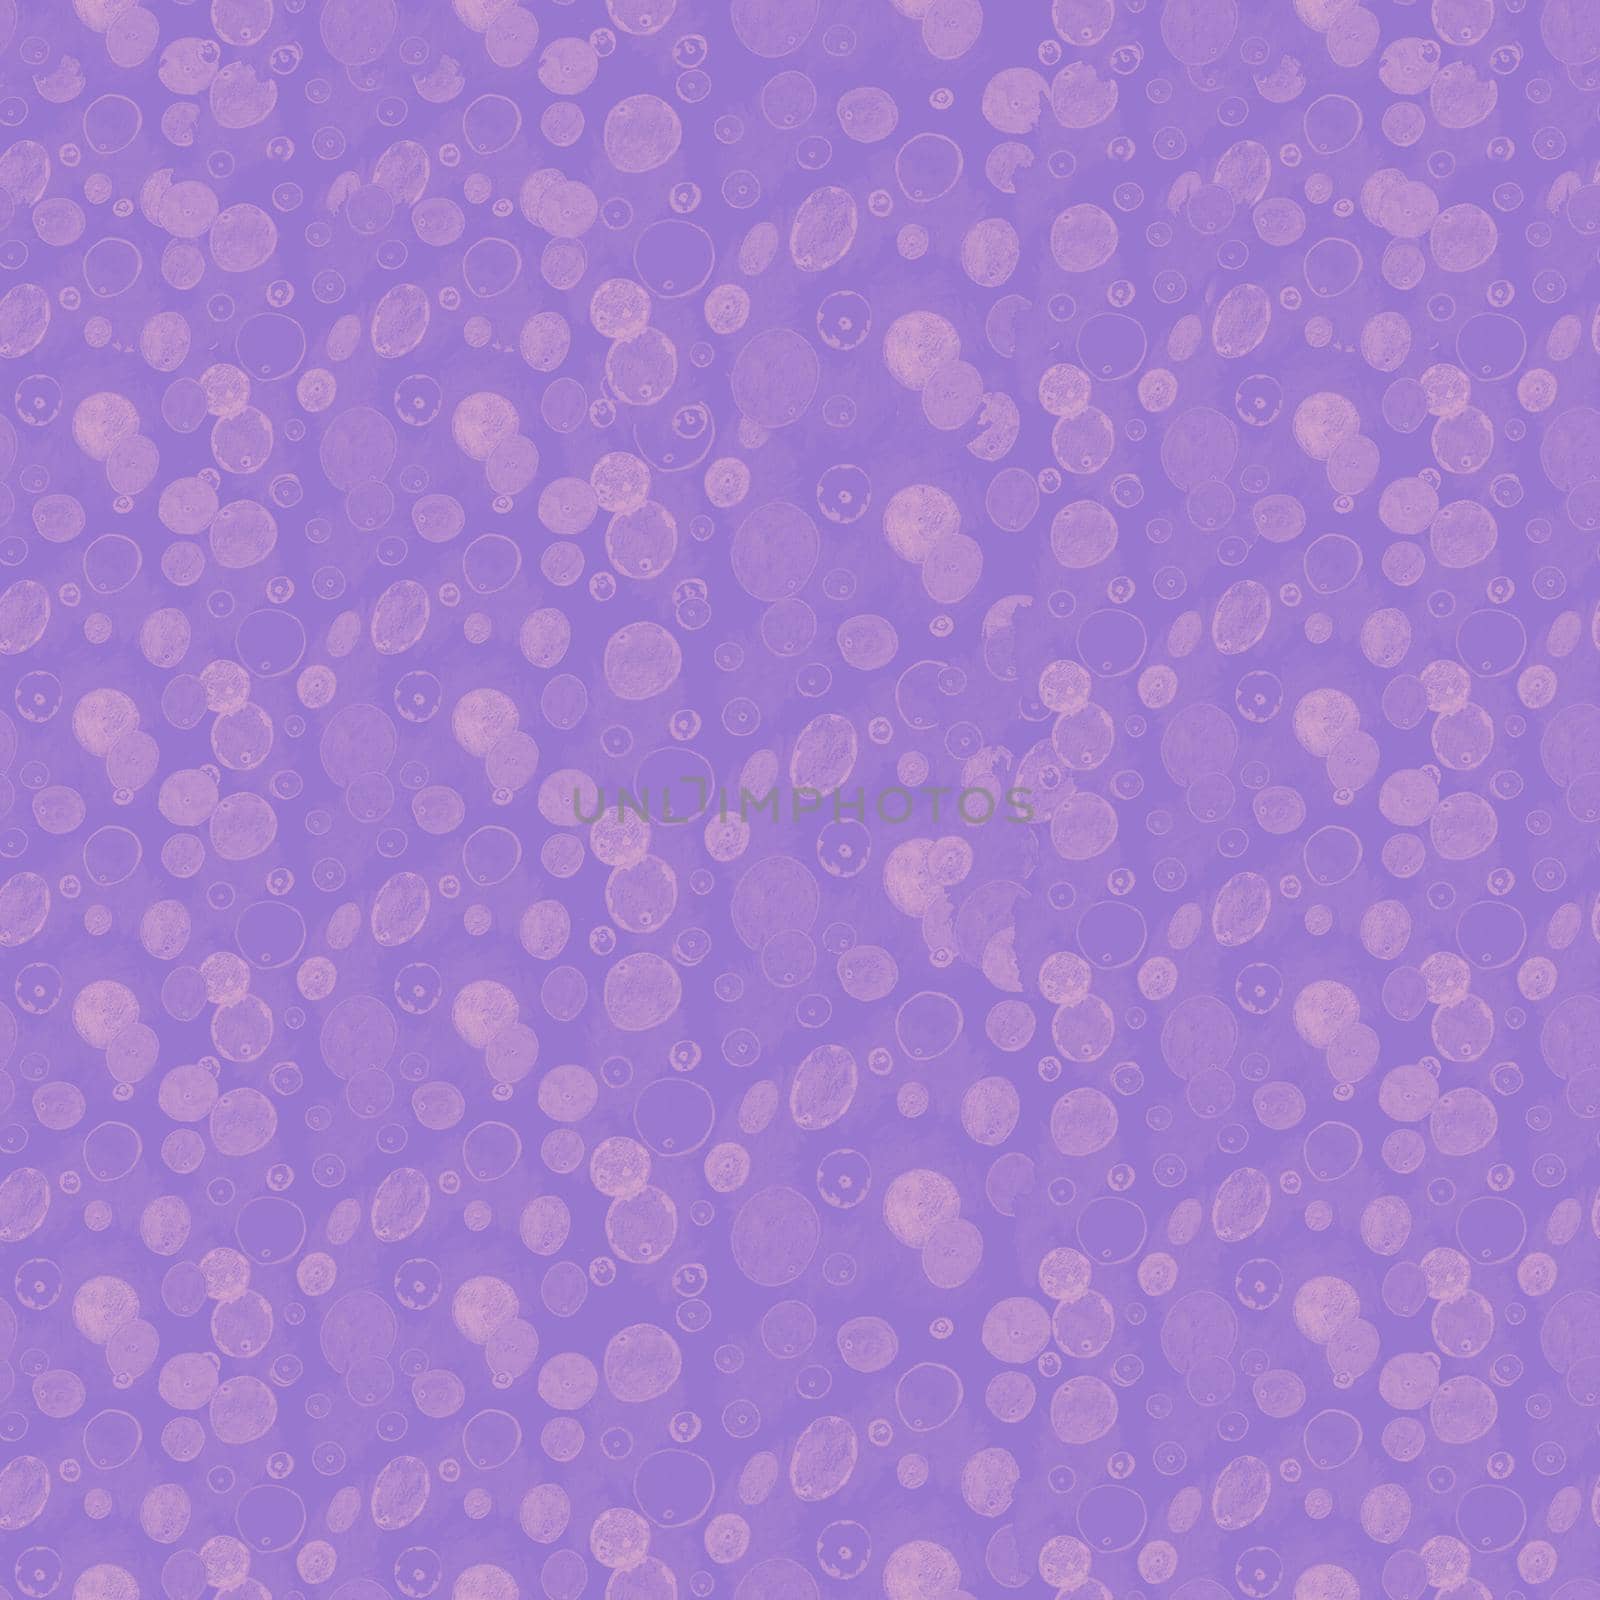 Hand drawn decorative background with balls and dots seamless pattern by fireFLYart